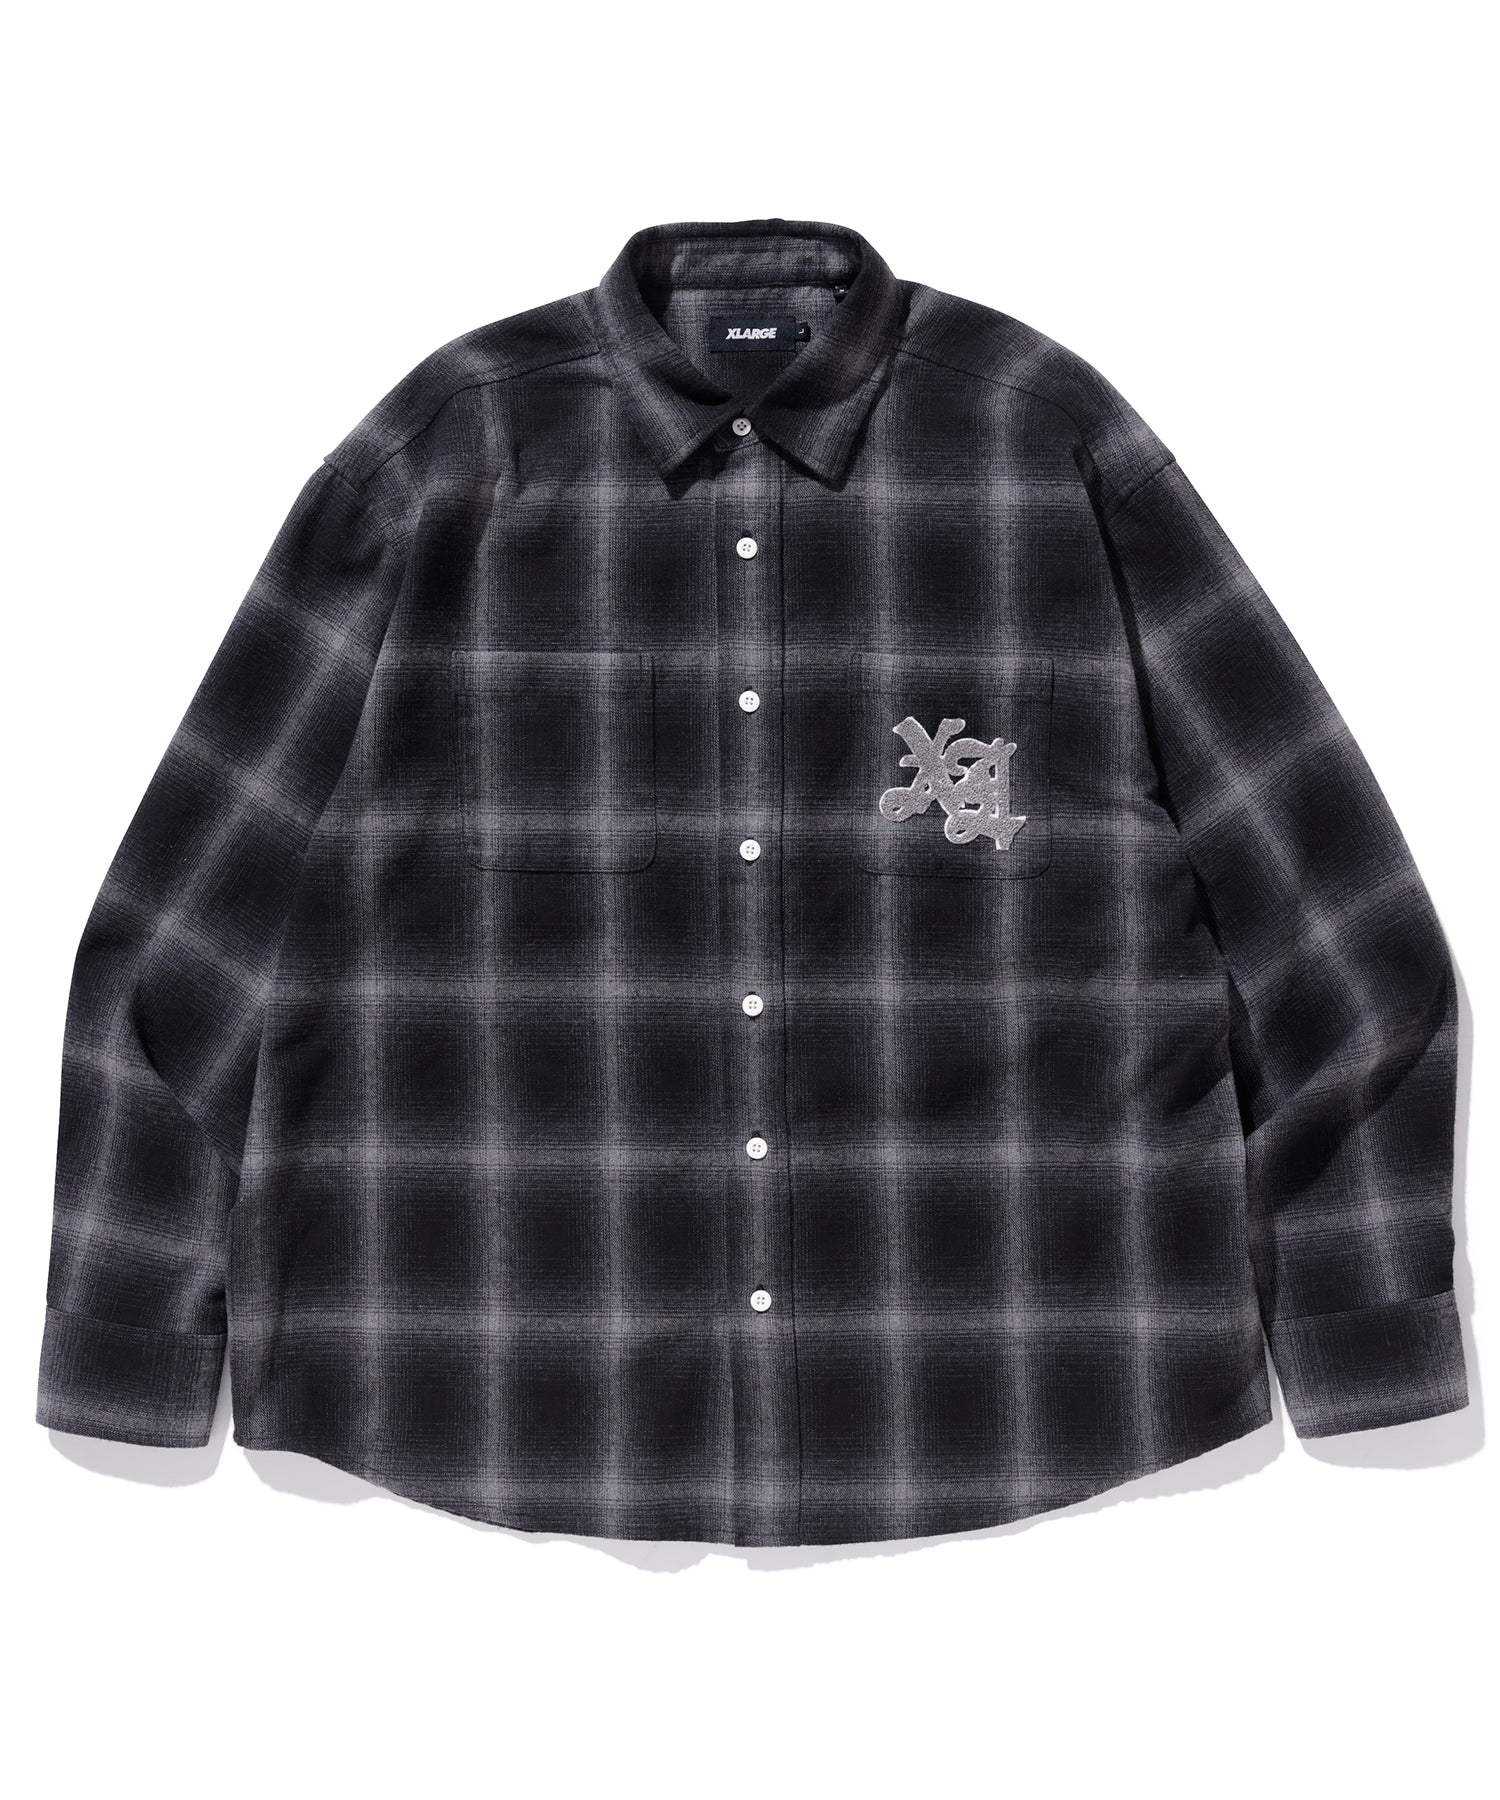 XLARGE PATCHED FLANNEL SHIRT ネルシャツ-